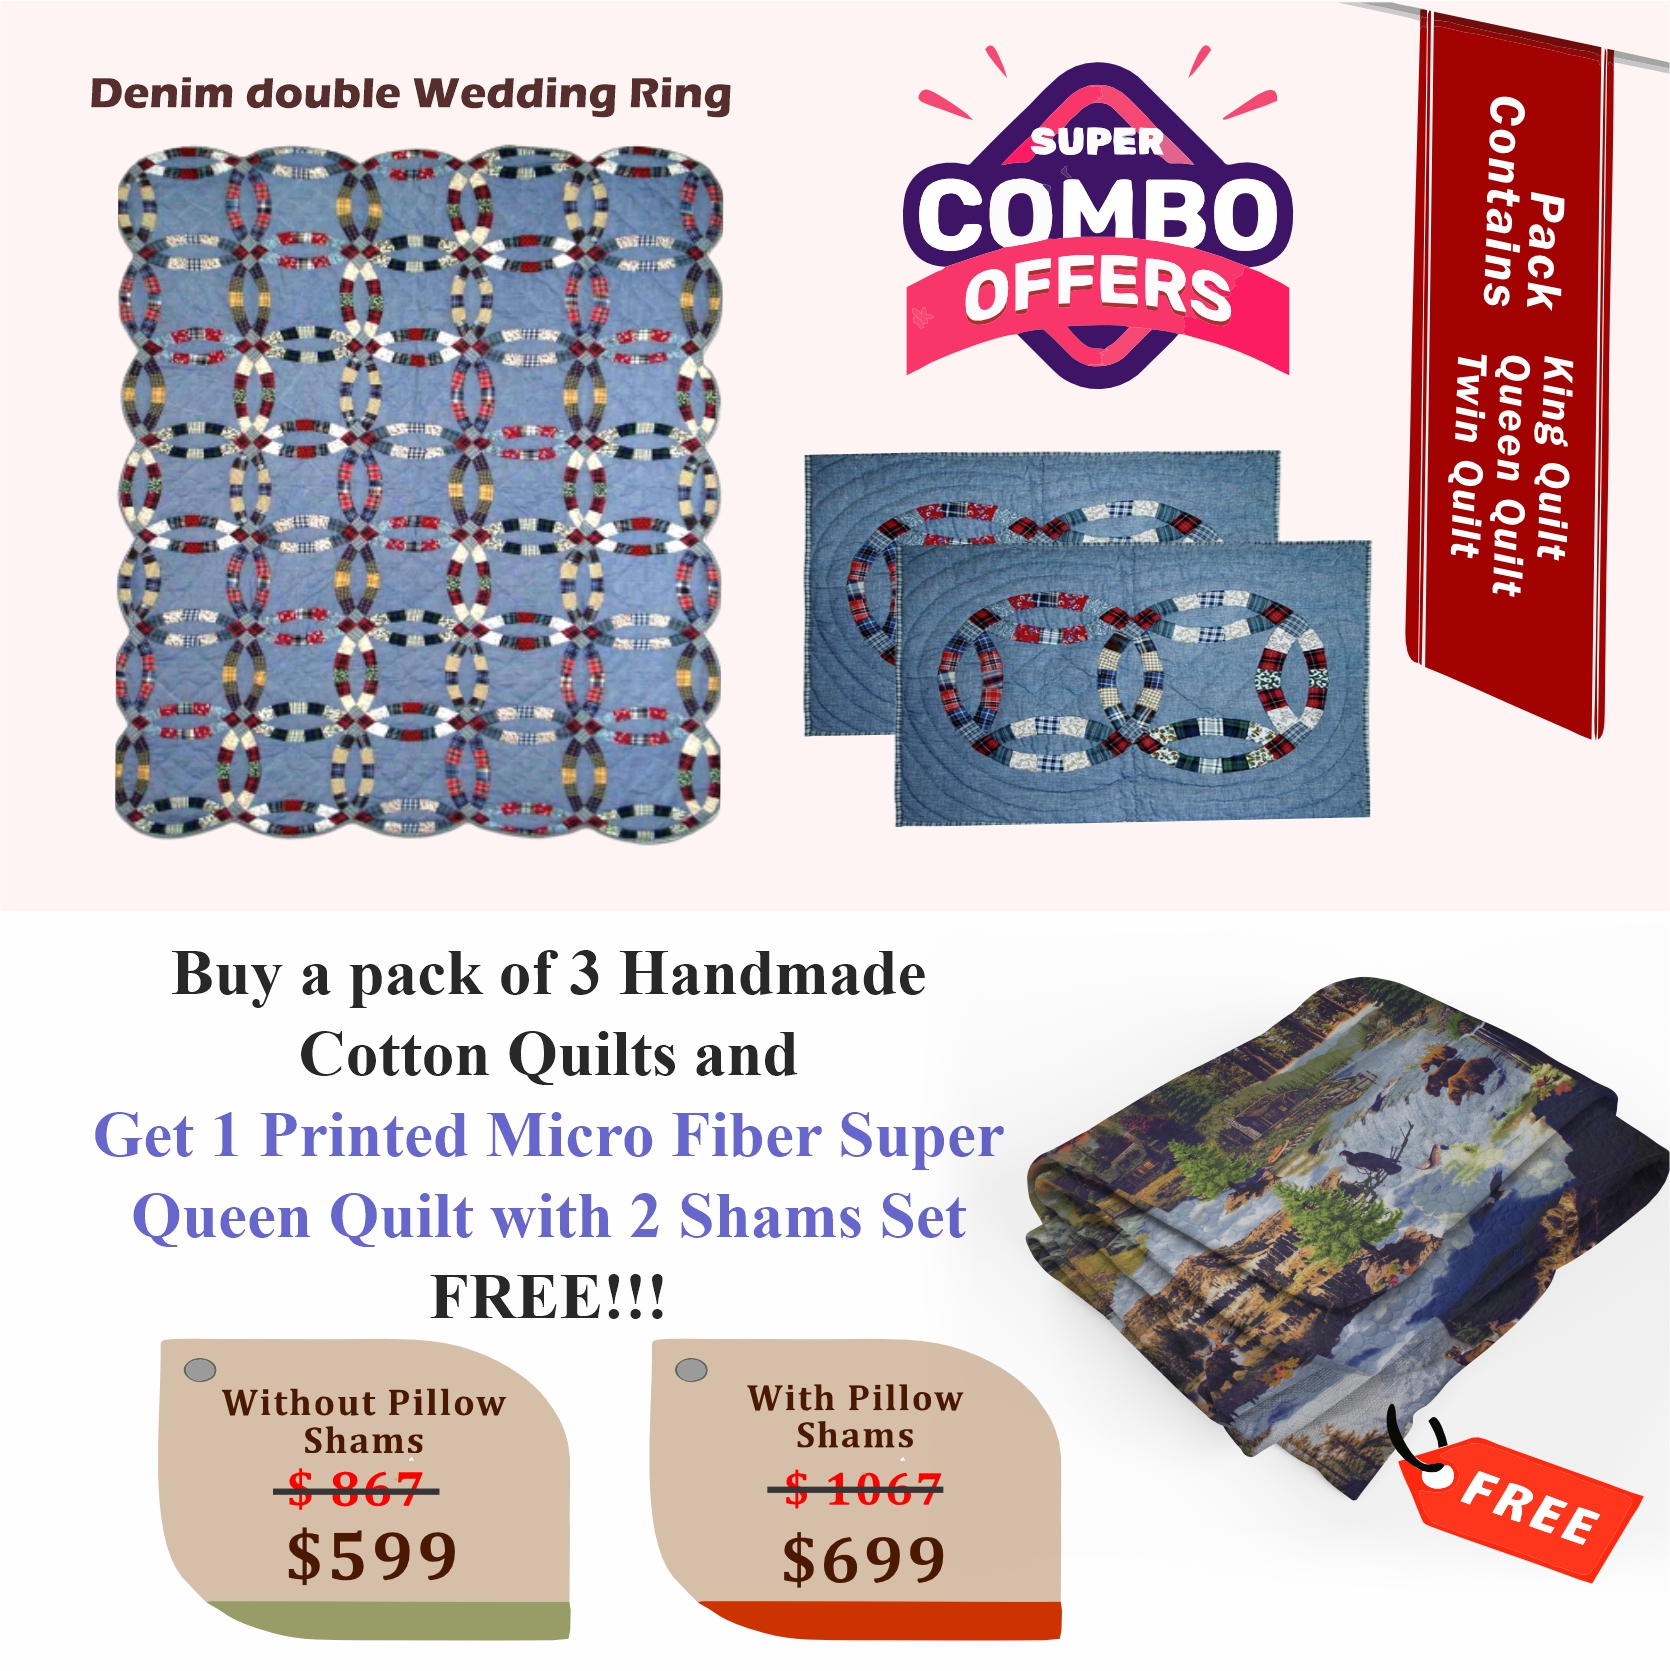 Blue cascade - Handmade Cotton quilts | Matching pillow shams | Buy 3 cotton quilts and get 1 Printed Microfiber Super Queen Quilt with 2 Shams set FREE